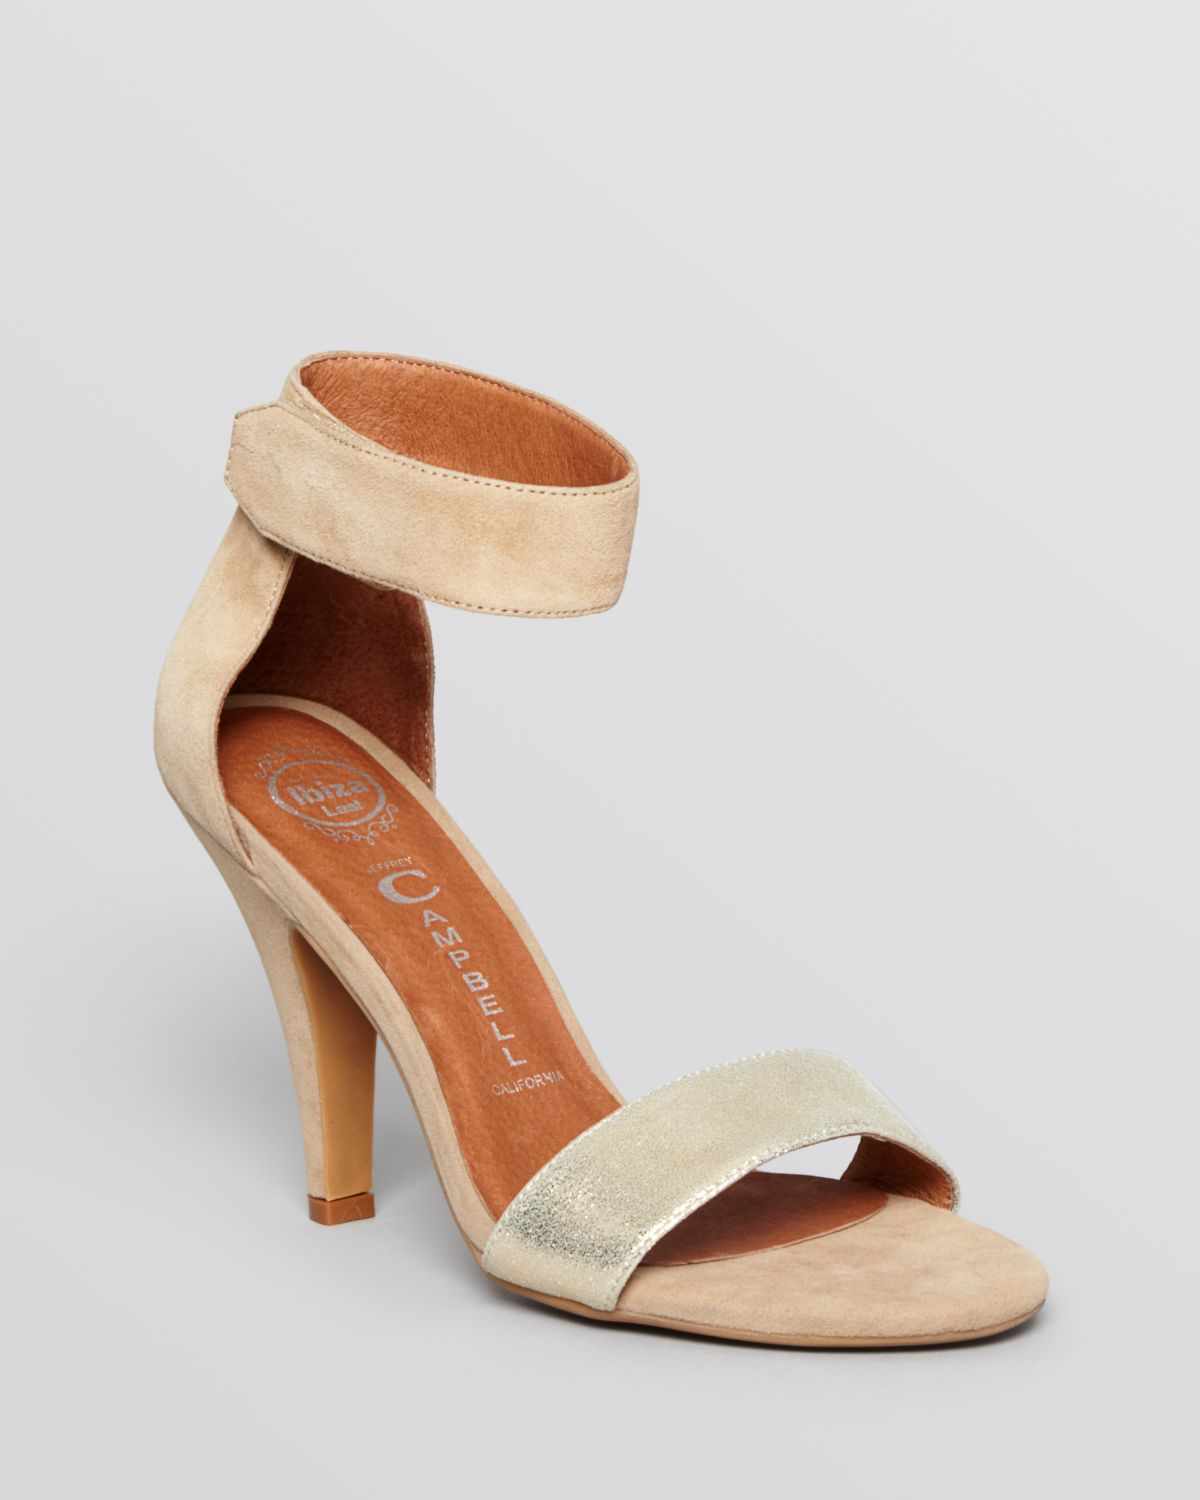 Lyst Jeffrey Campbell Ankle Strap  High Heel  Sandals  in 